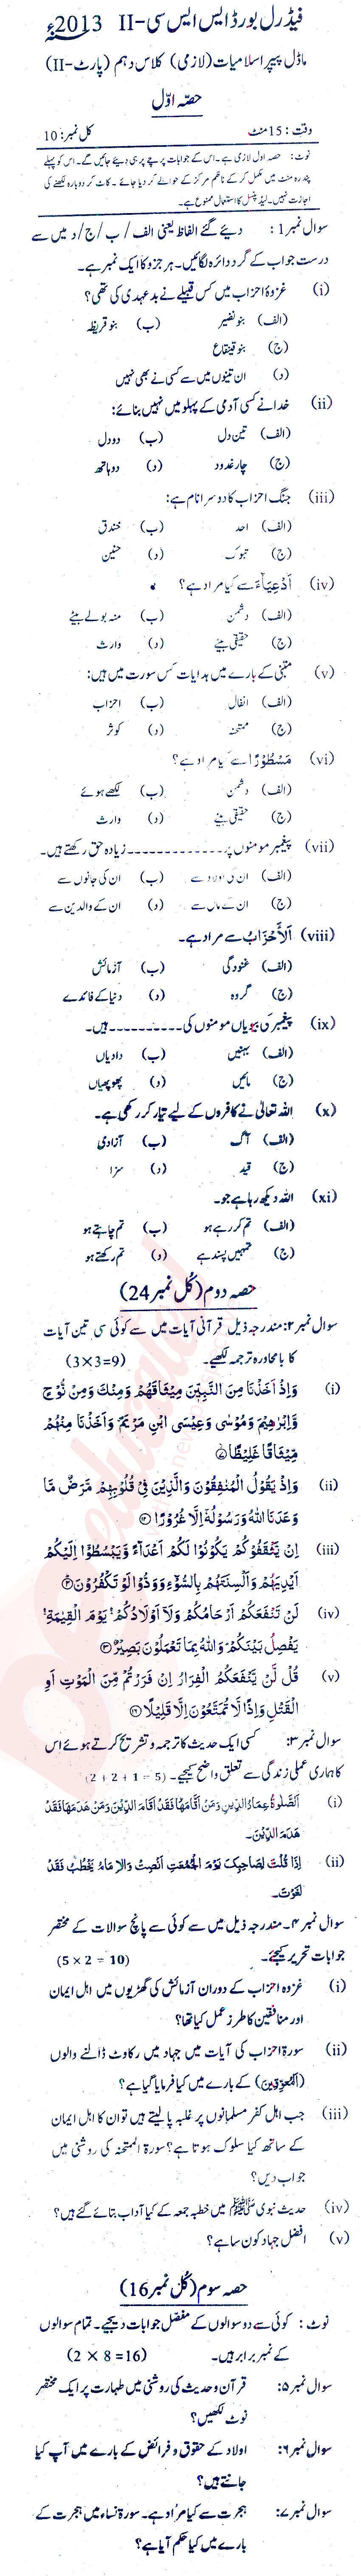 Islamiat (Compulsory) 10th class Past Paper Group 1 Federal BISE  2013